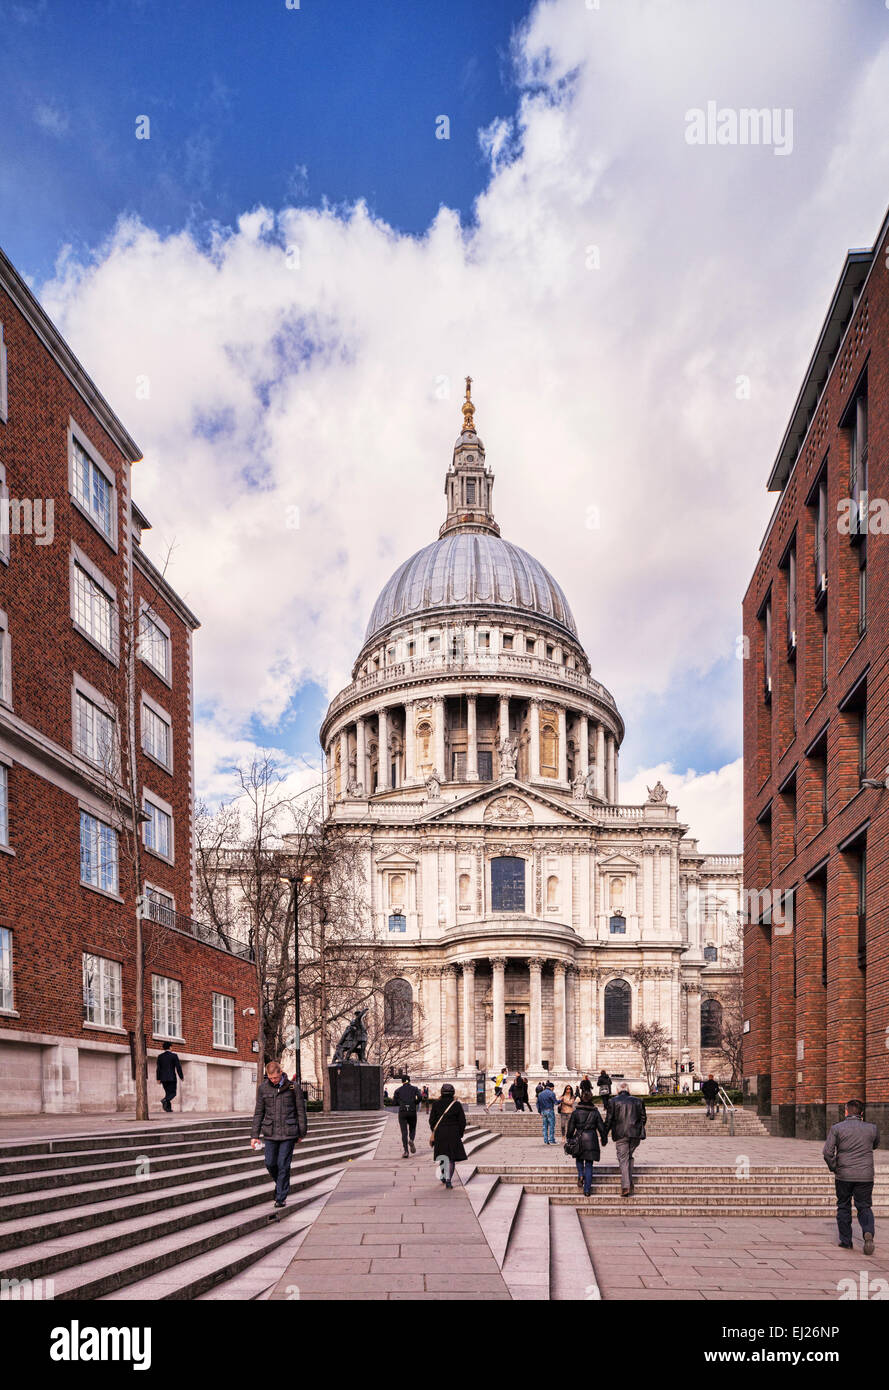 St Paul's Cathedral, London, England. Stock Photo